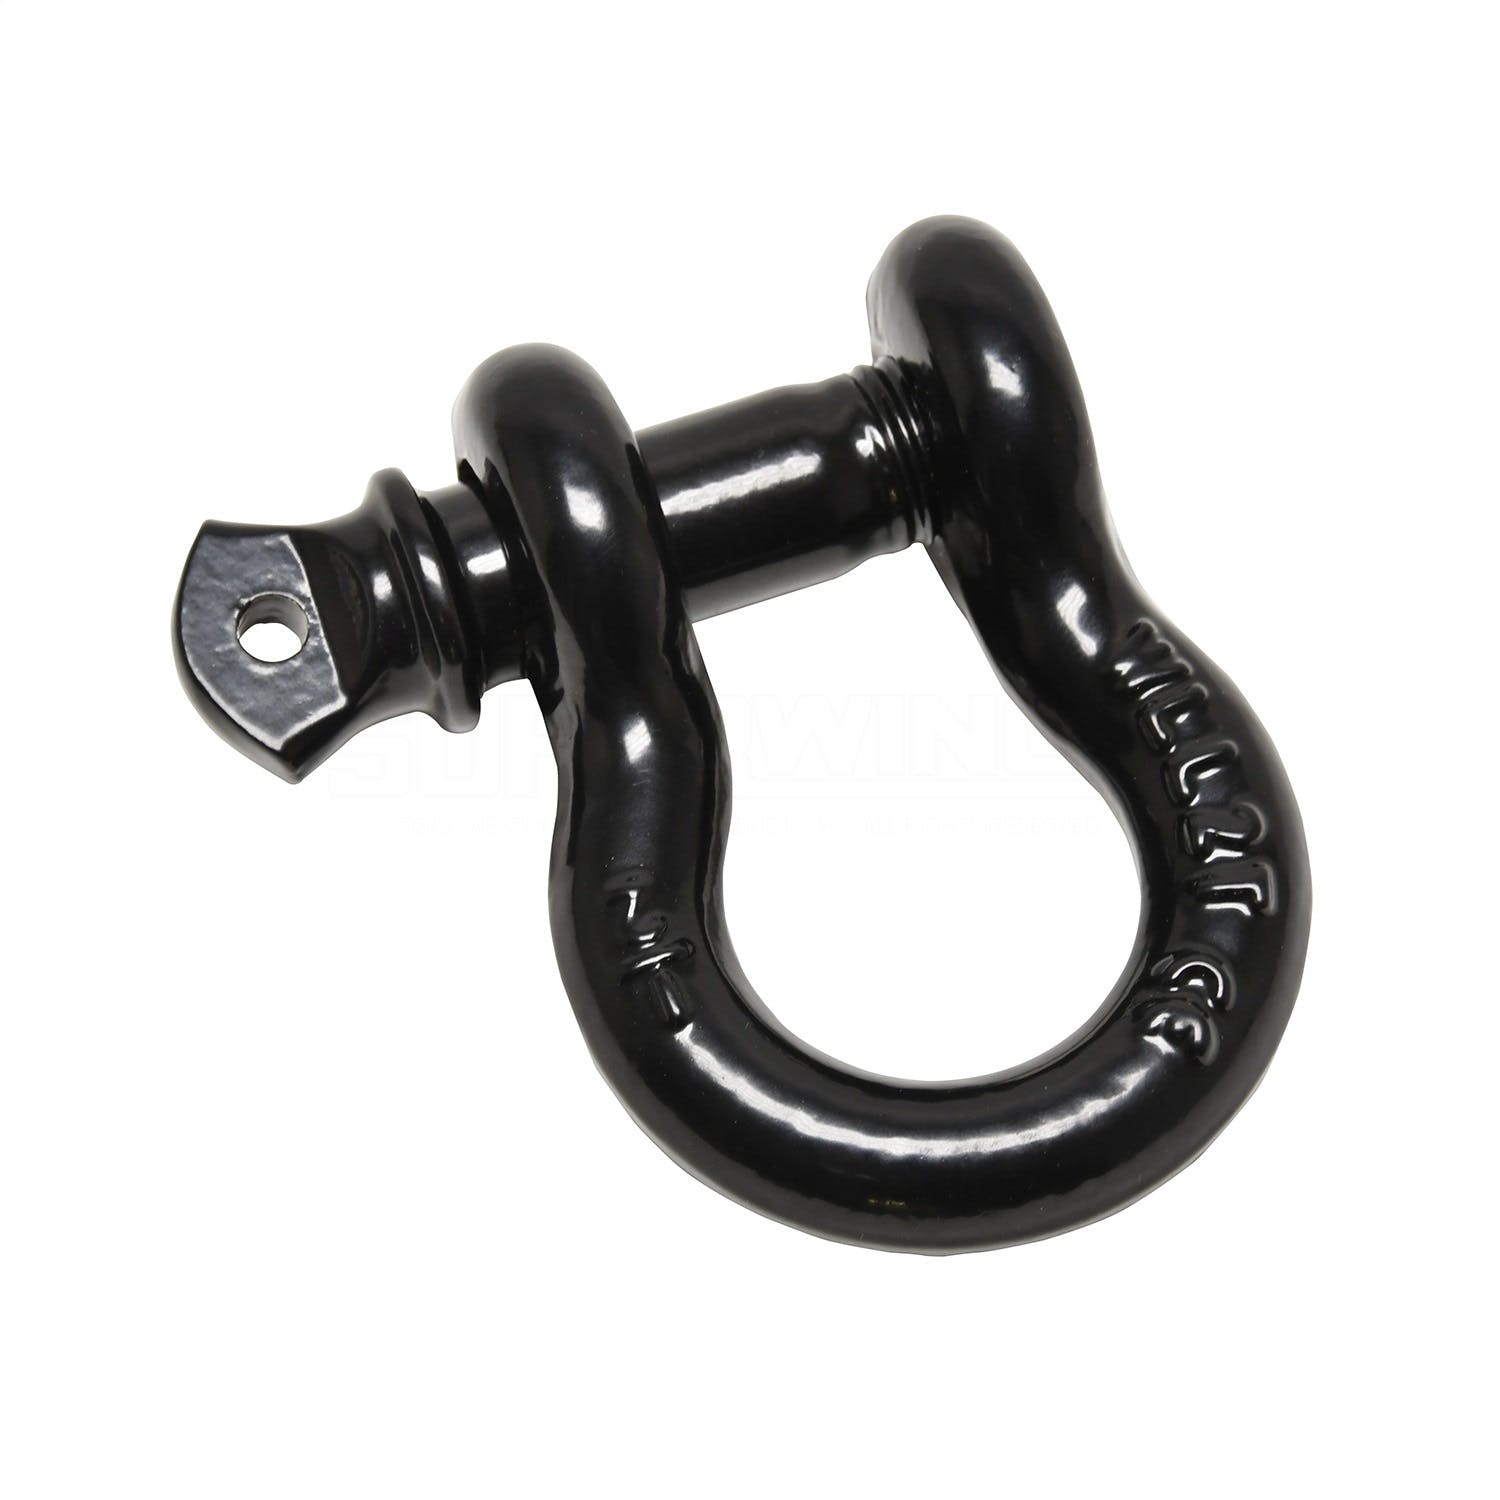 Superwinch 2538 Bow Shackle